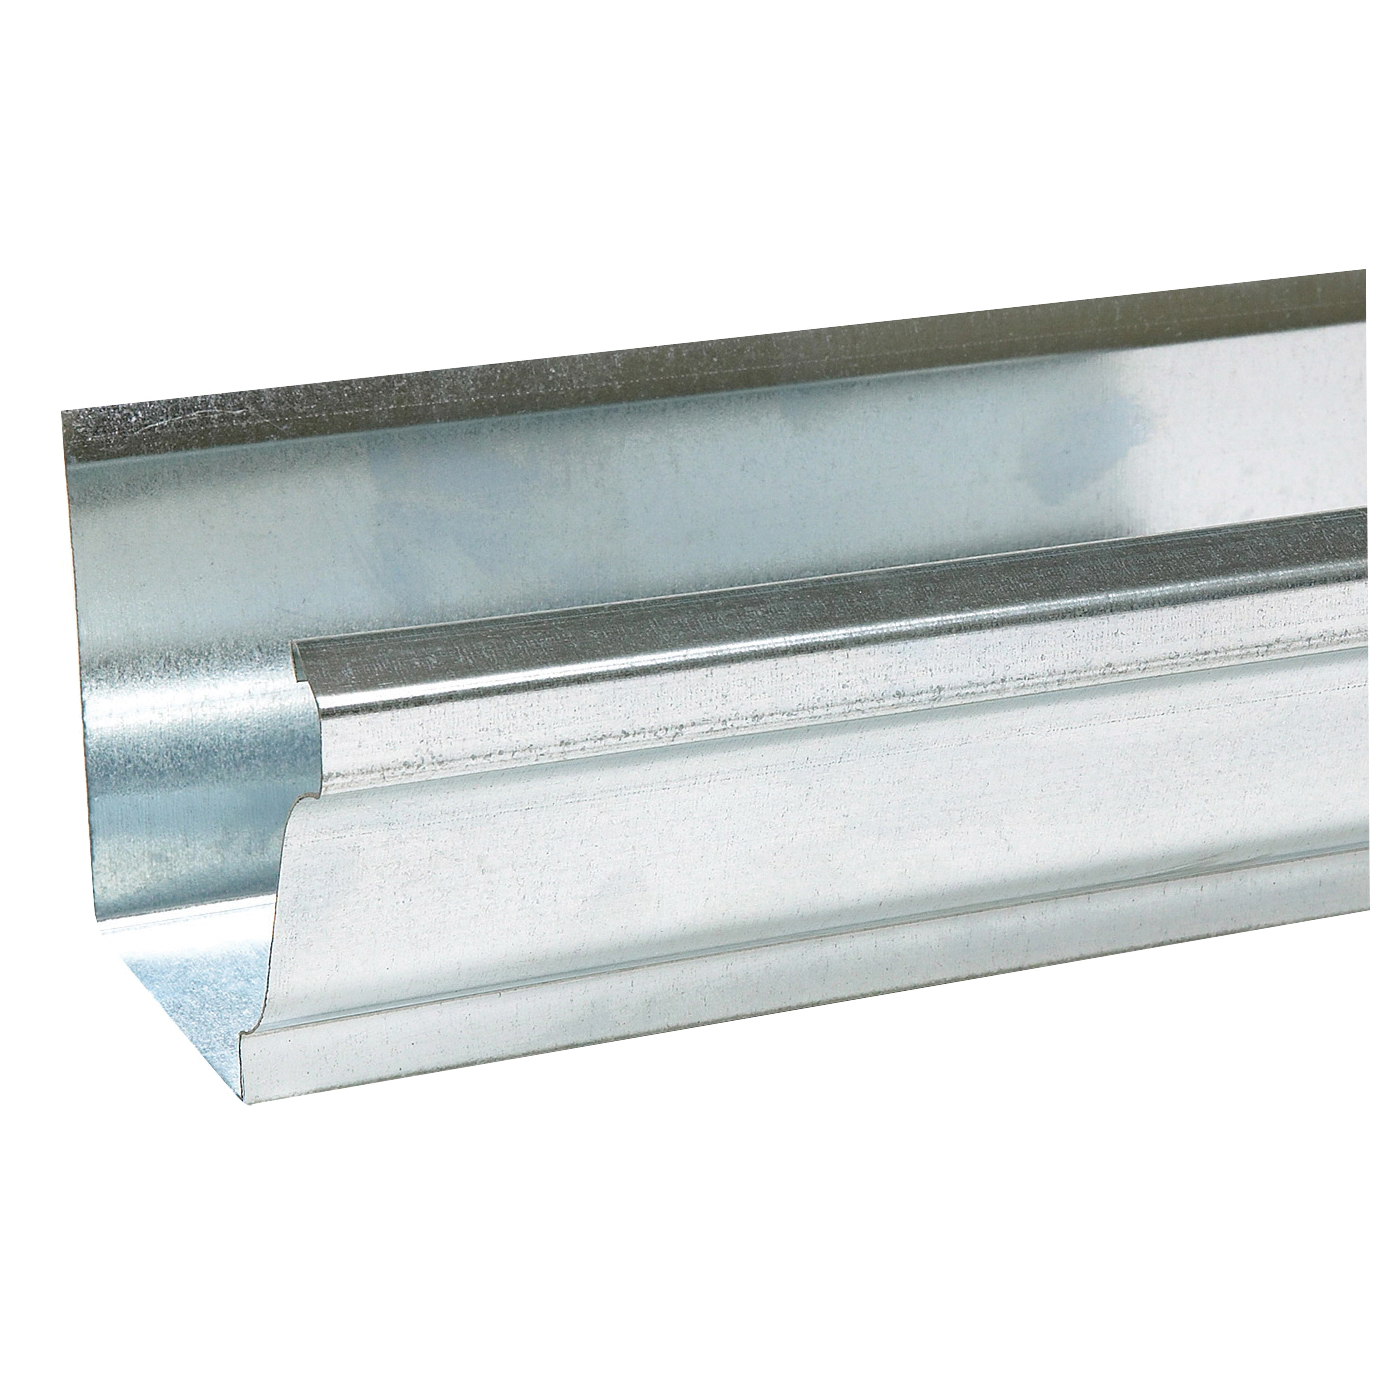 2800700120 Rain Gutter, 10 ft L, 5 in W, 30 Thick Material, Galvanized Steel